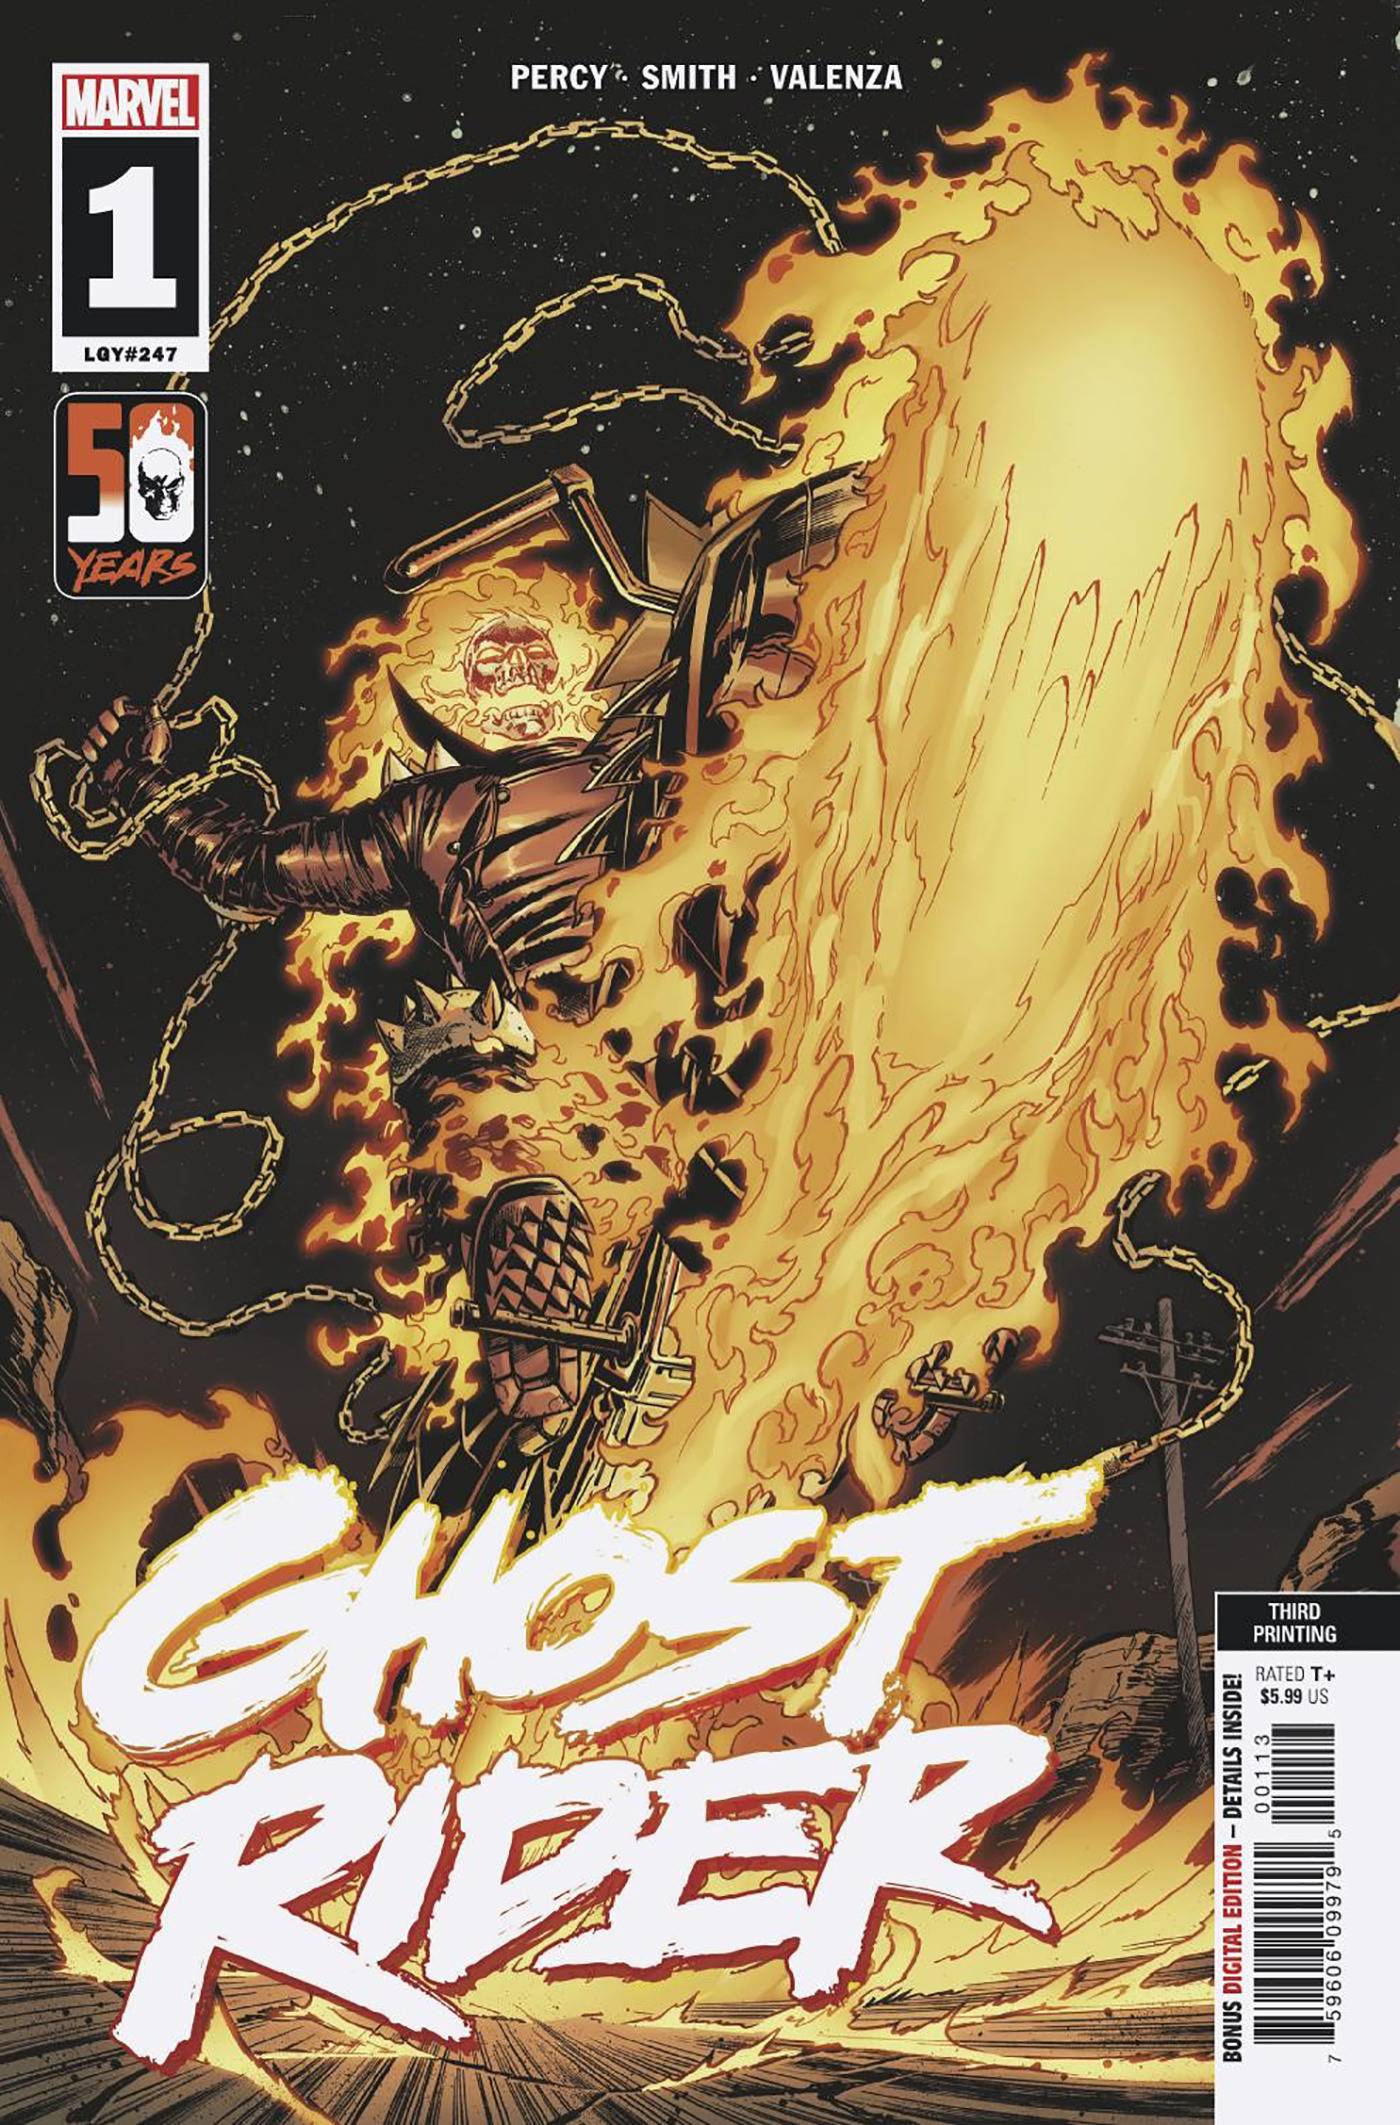 06/08/2022 GHOST RIDER #1 3RD PTG CORY SMITH VARIANT